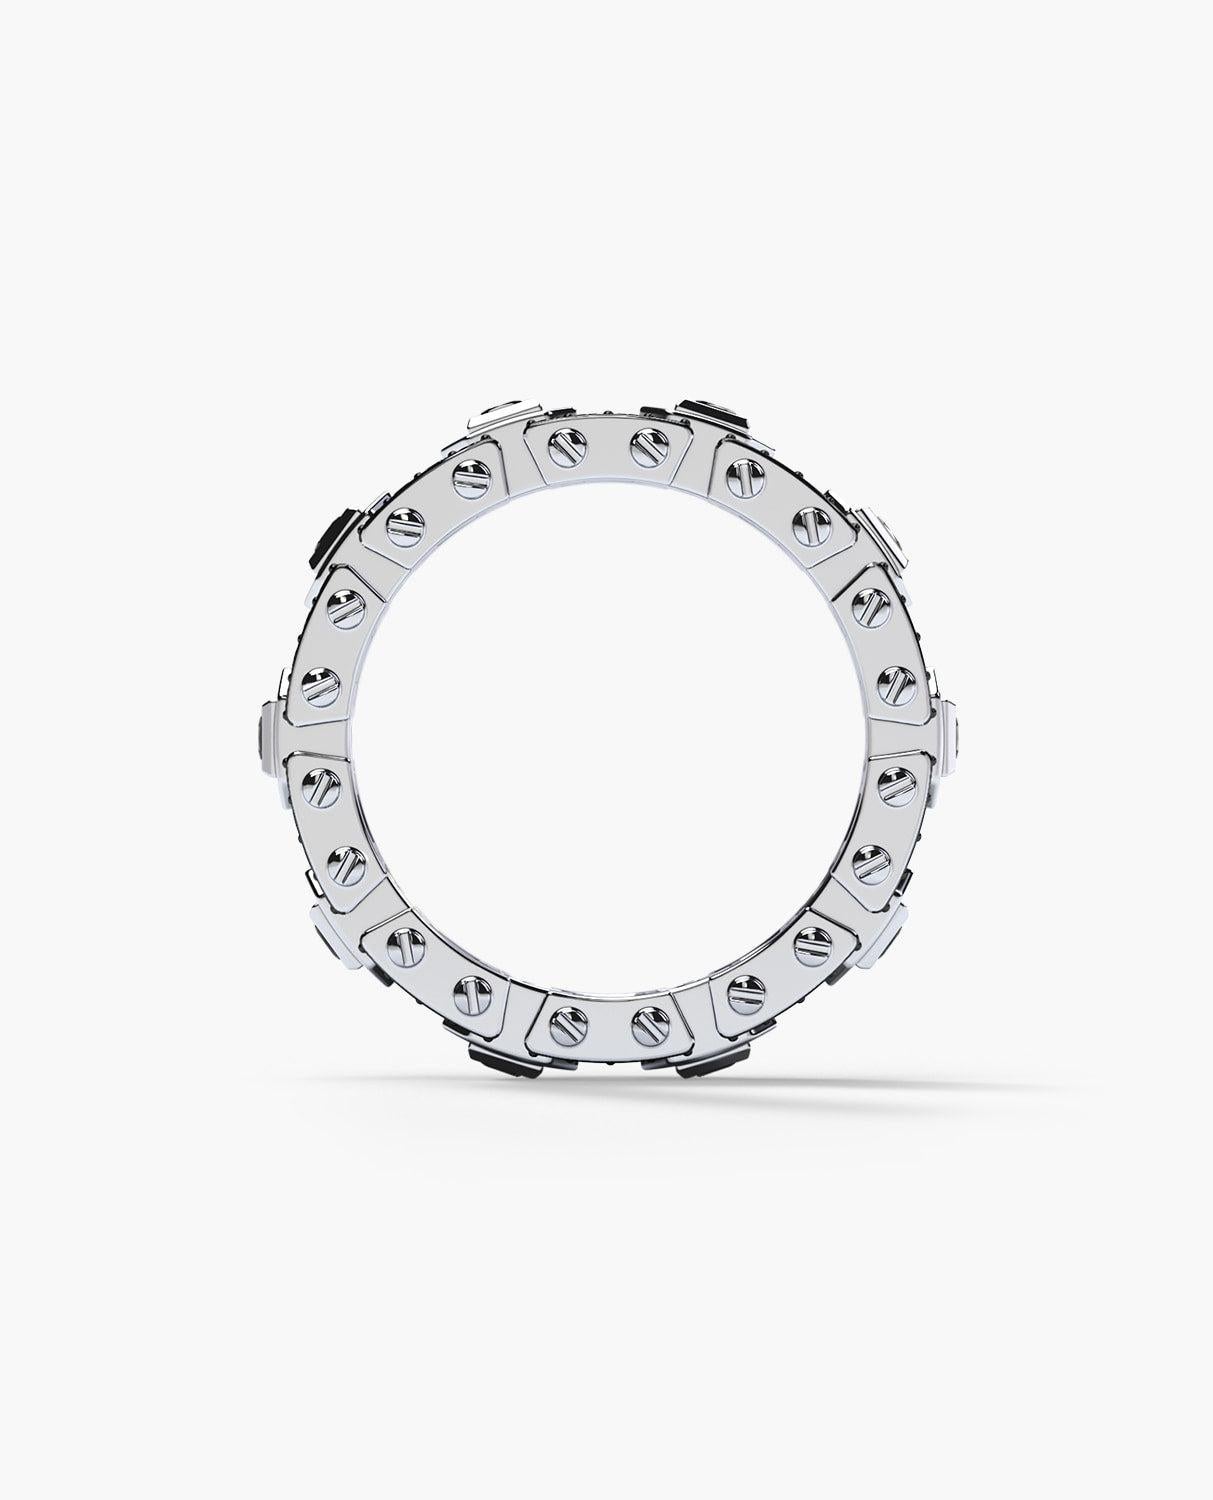 This ring has been customized with Black & White Diamonds
Ring Width: 10 mm
Diamond Carat Weight (Appx.): 1.20 ct
Diamond Type: Natural White and Black Diamond
Diamond Color/Clarity: F-G/VS1-VS2
Metal: 14k Gold
Gender: for Men and Women

The design